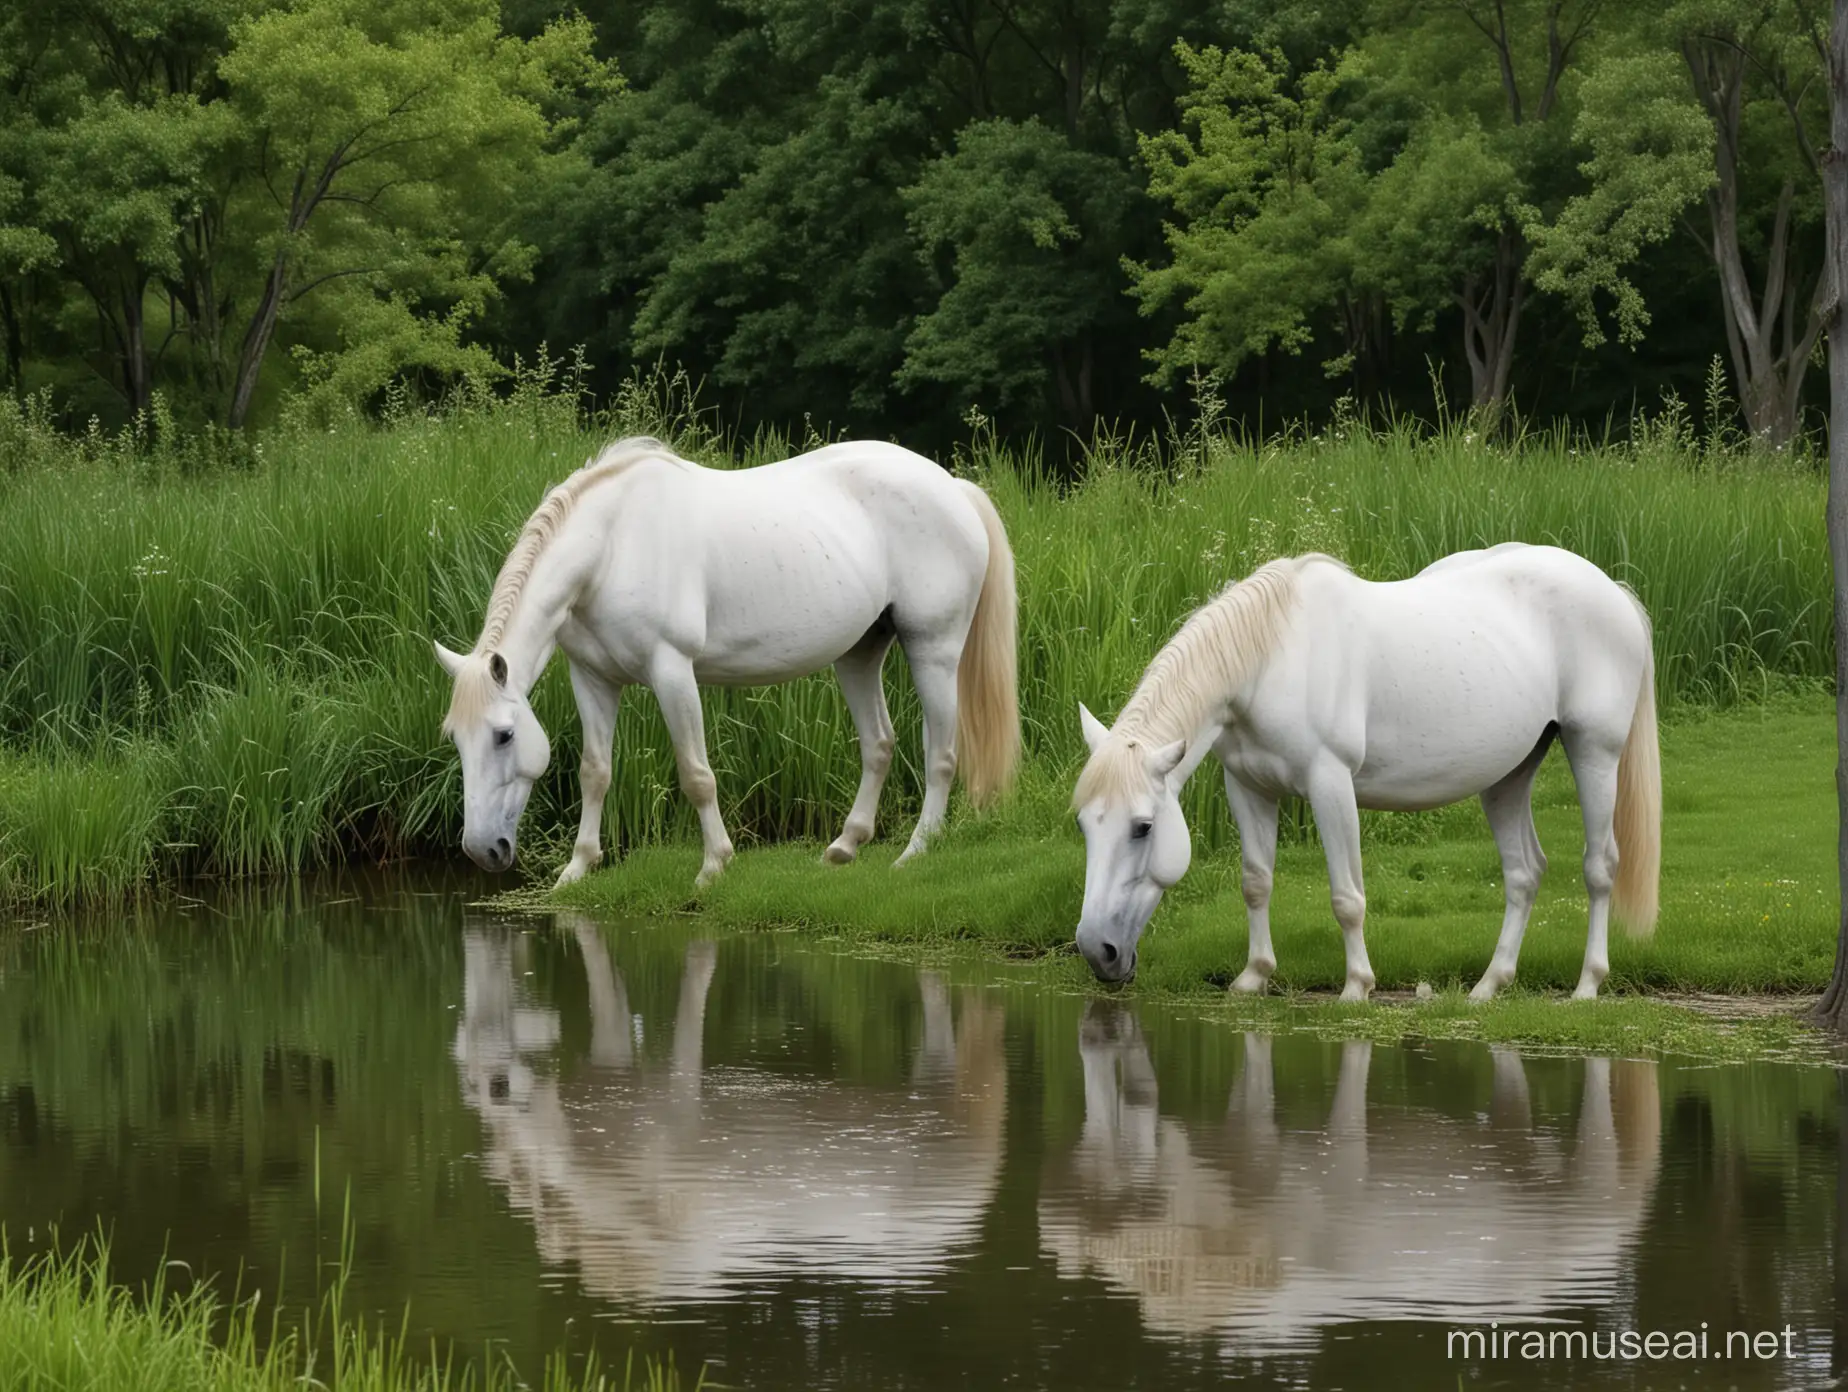 Two white horses graze near the water's edge, their elegant forms contrasting against the lush greenery. With gentle movements, they lower their heads to the earth, nibbling on the tender grasses that sway in the breeze. The tranquil scene is accentuated by the stillness of the nearby pond, reflecting the serene tableau of the grazing horses.